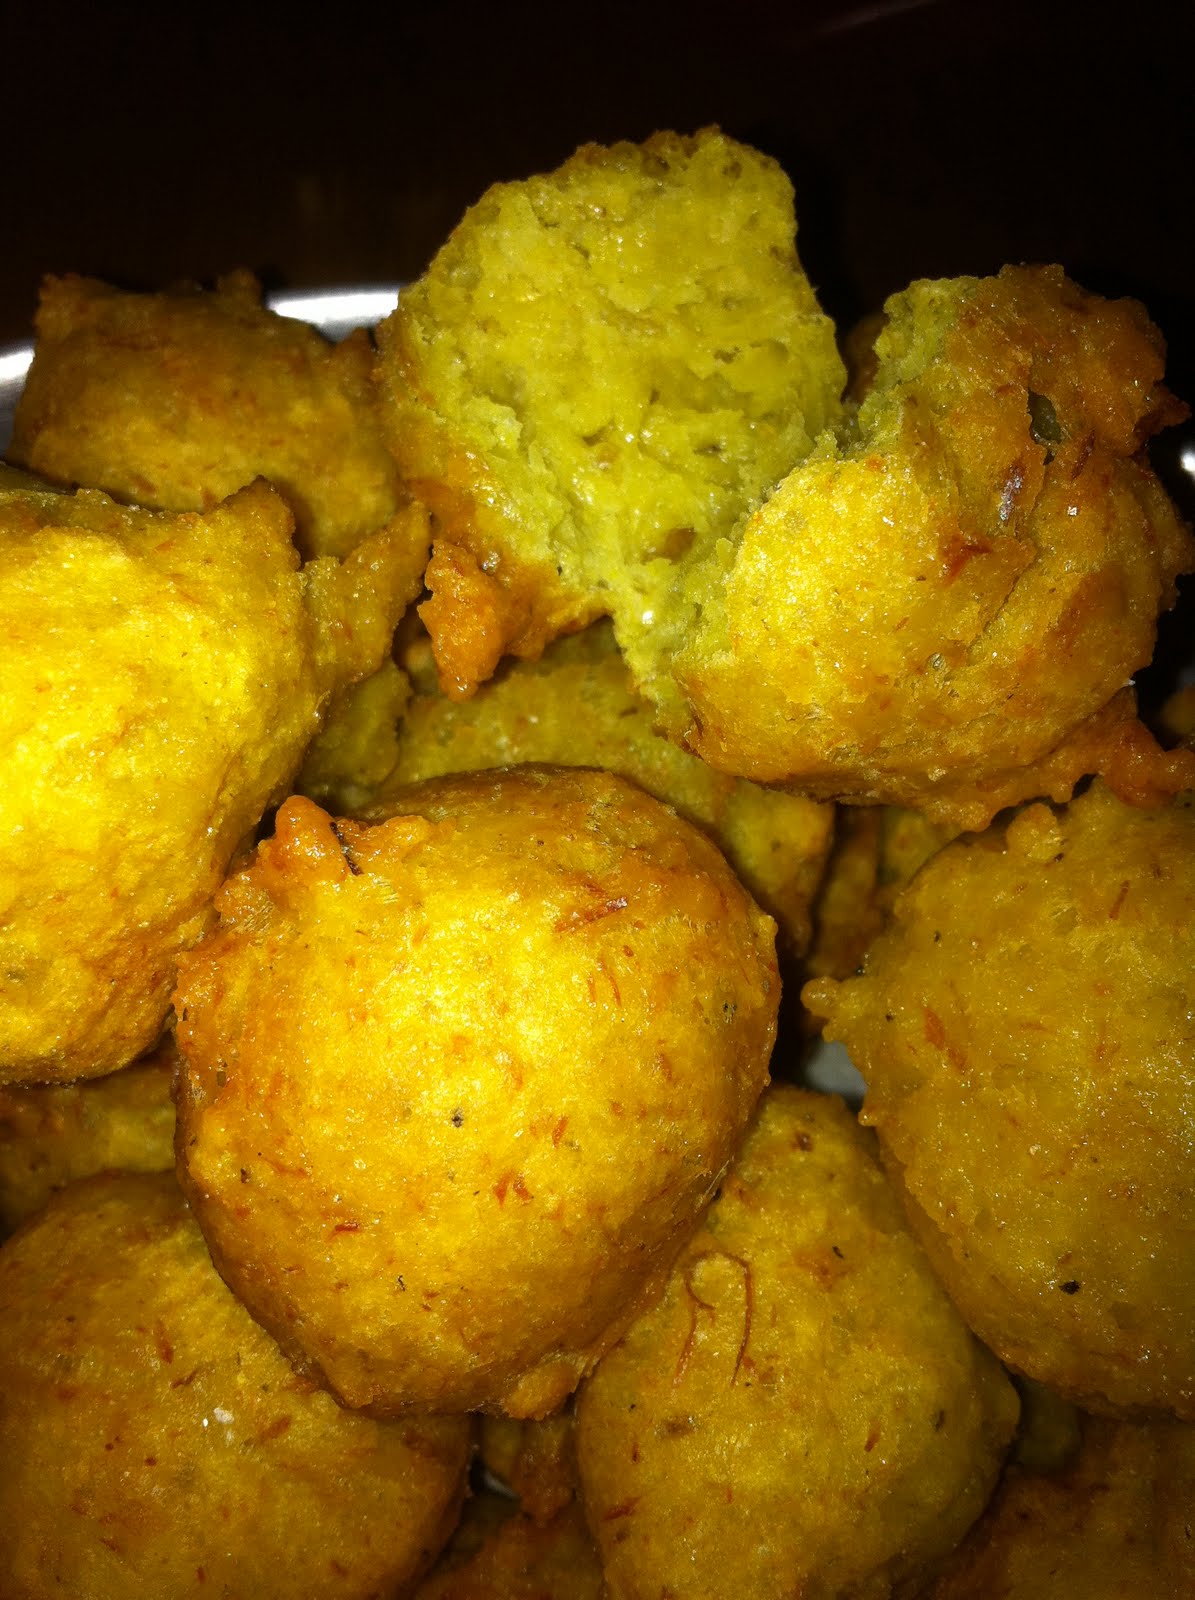 ThE sToRy WiLL NeVeRR End: Cucur Ikan Bilis Kembung